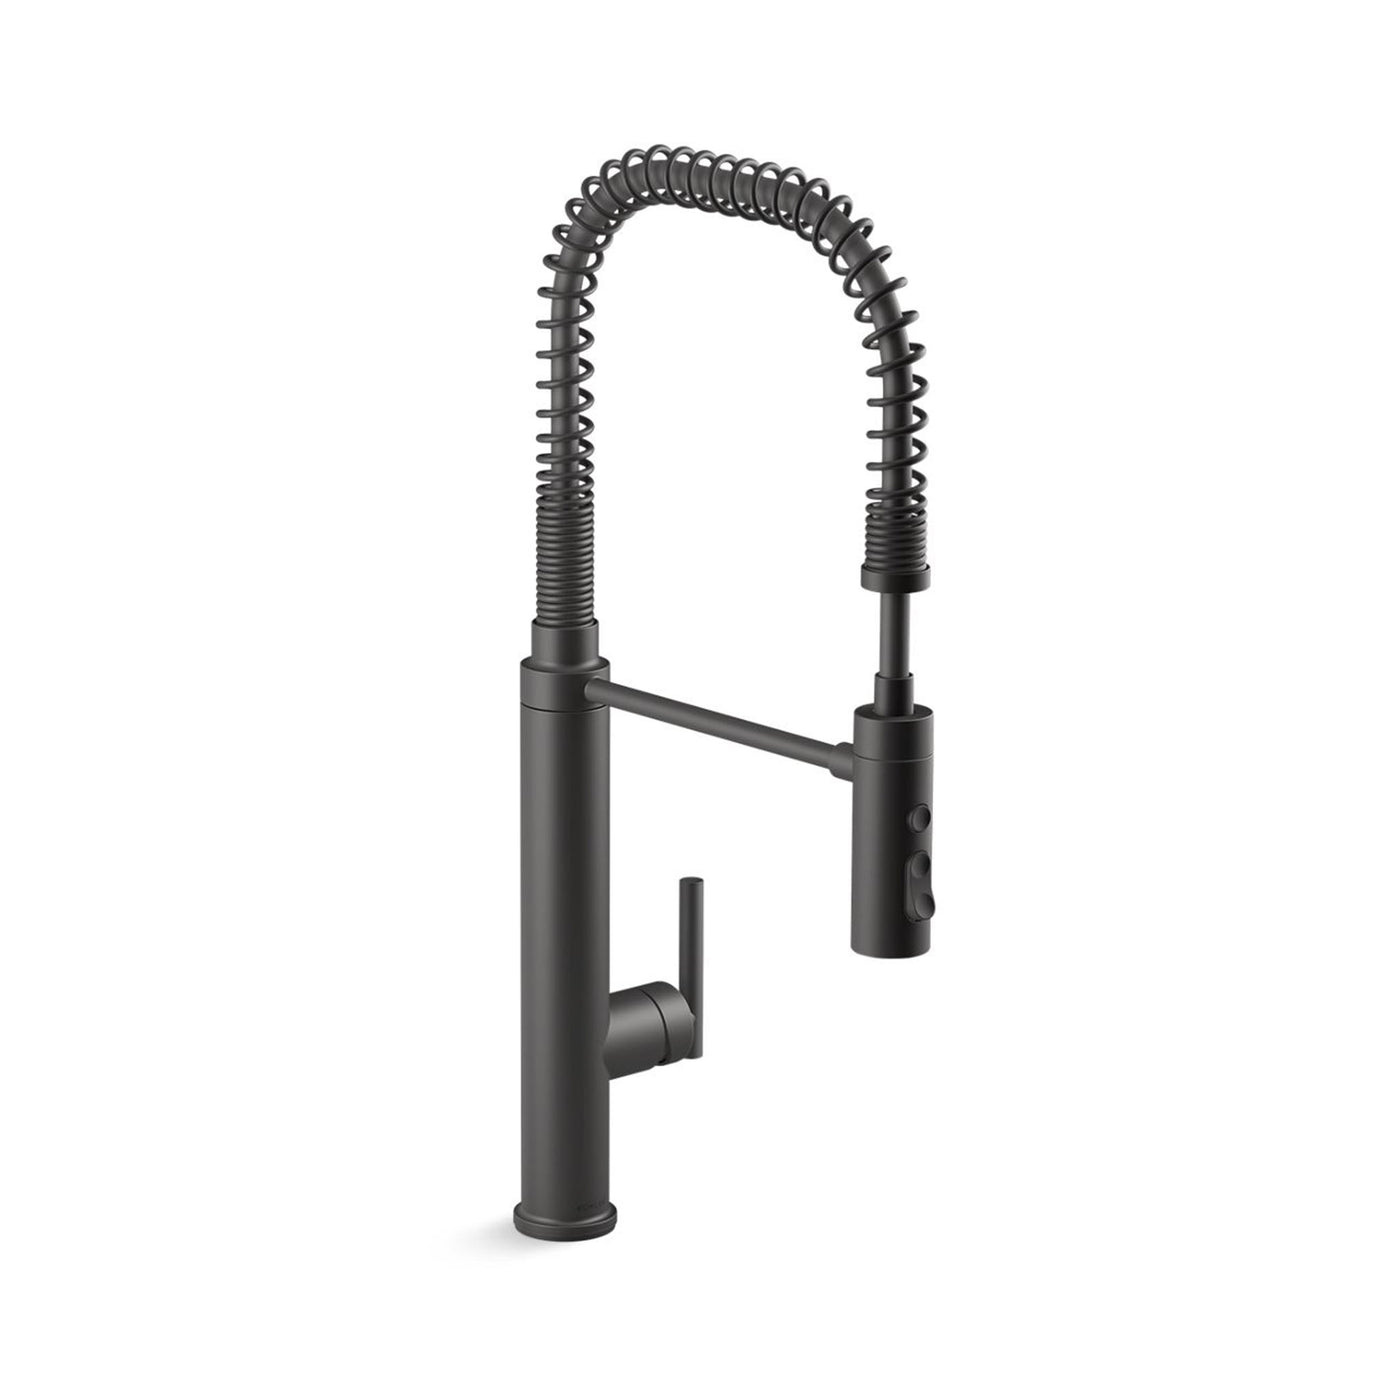 Purist® Semi-professional kitchen sink faucet with three-function sprayhead